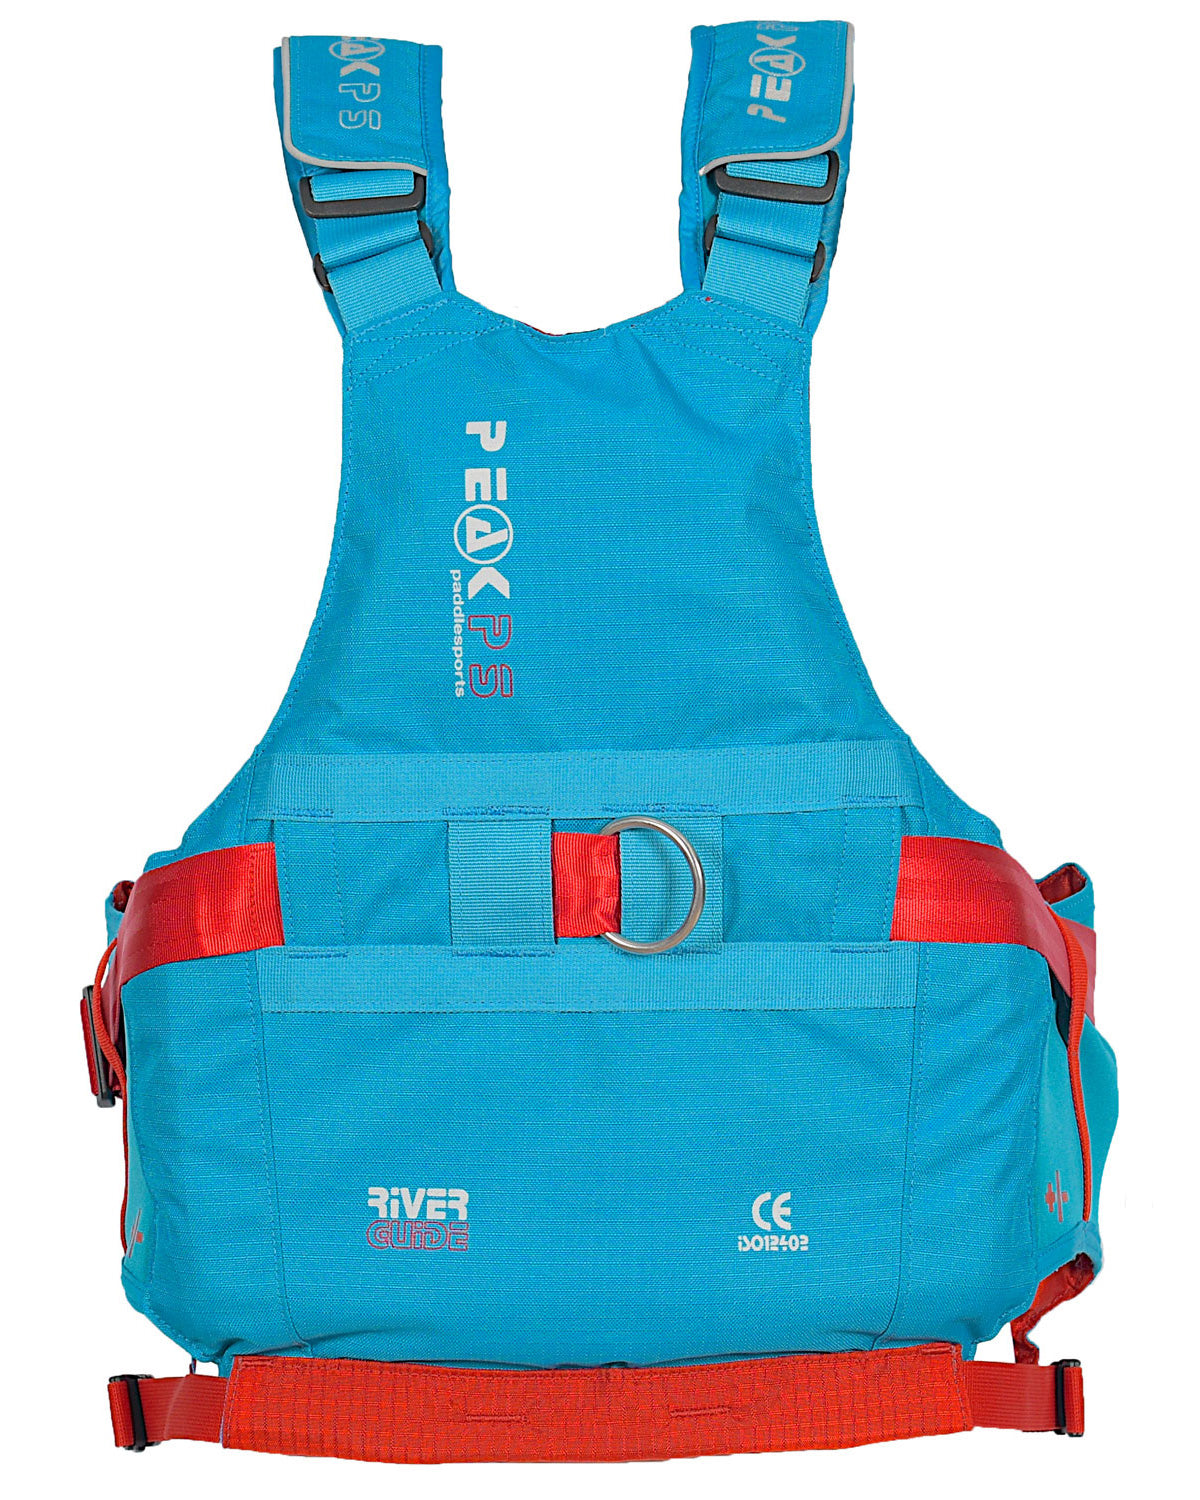 PEAK UK Paddlesports river guide buoyancy aid from the rear